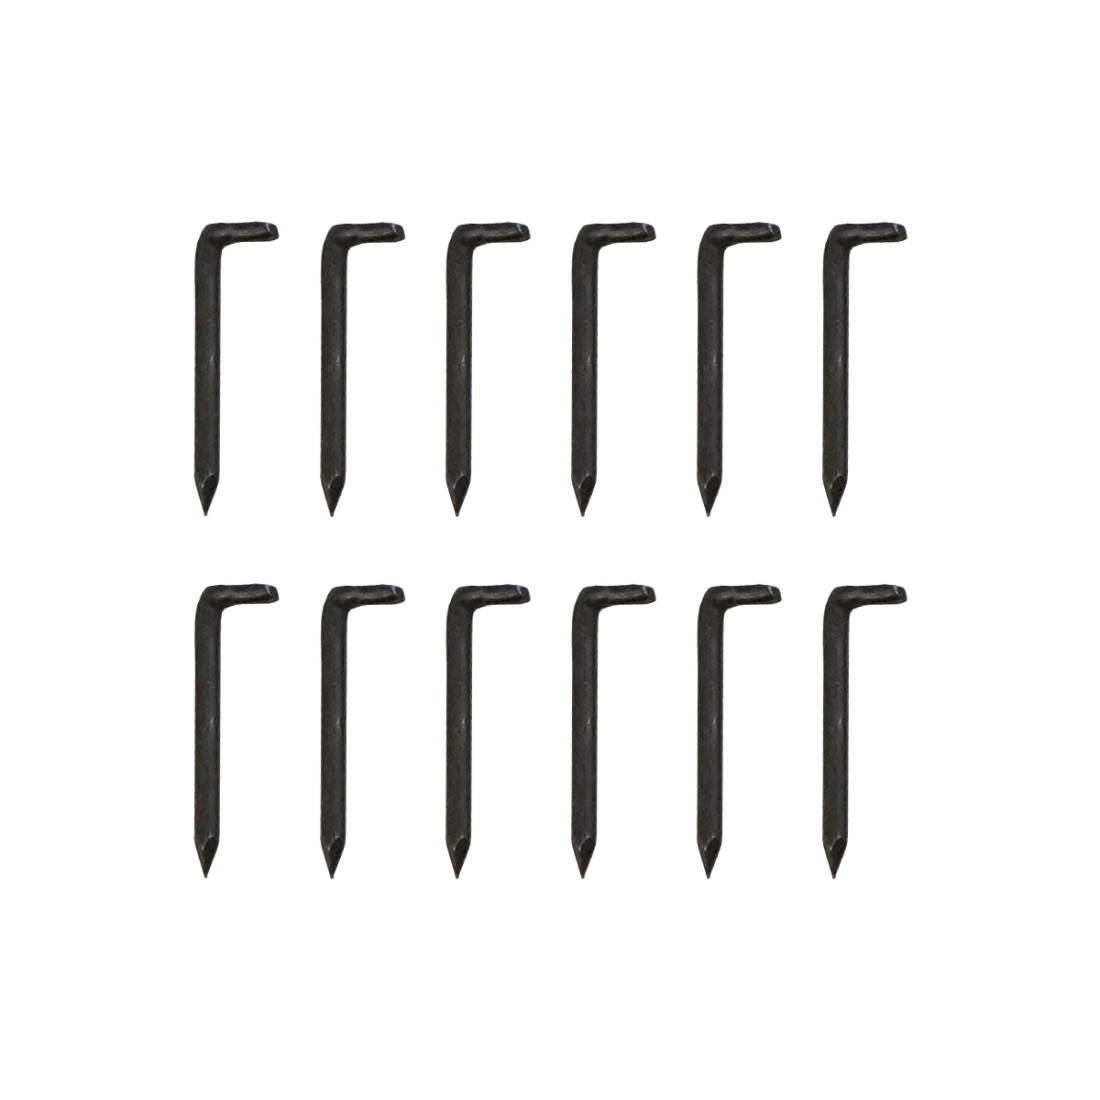 Gold Tone Railroad Spikes - 12 Pack